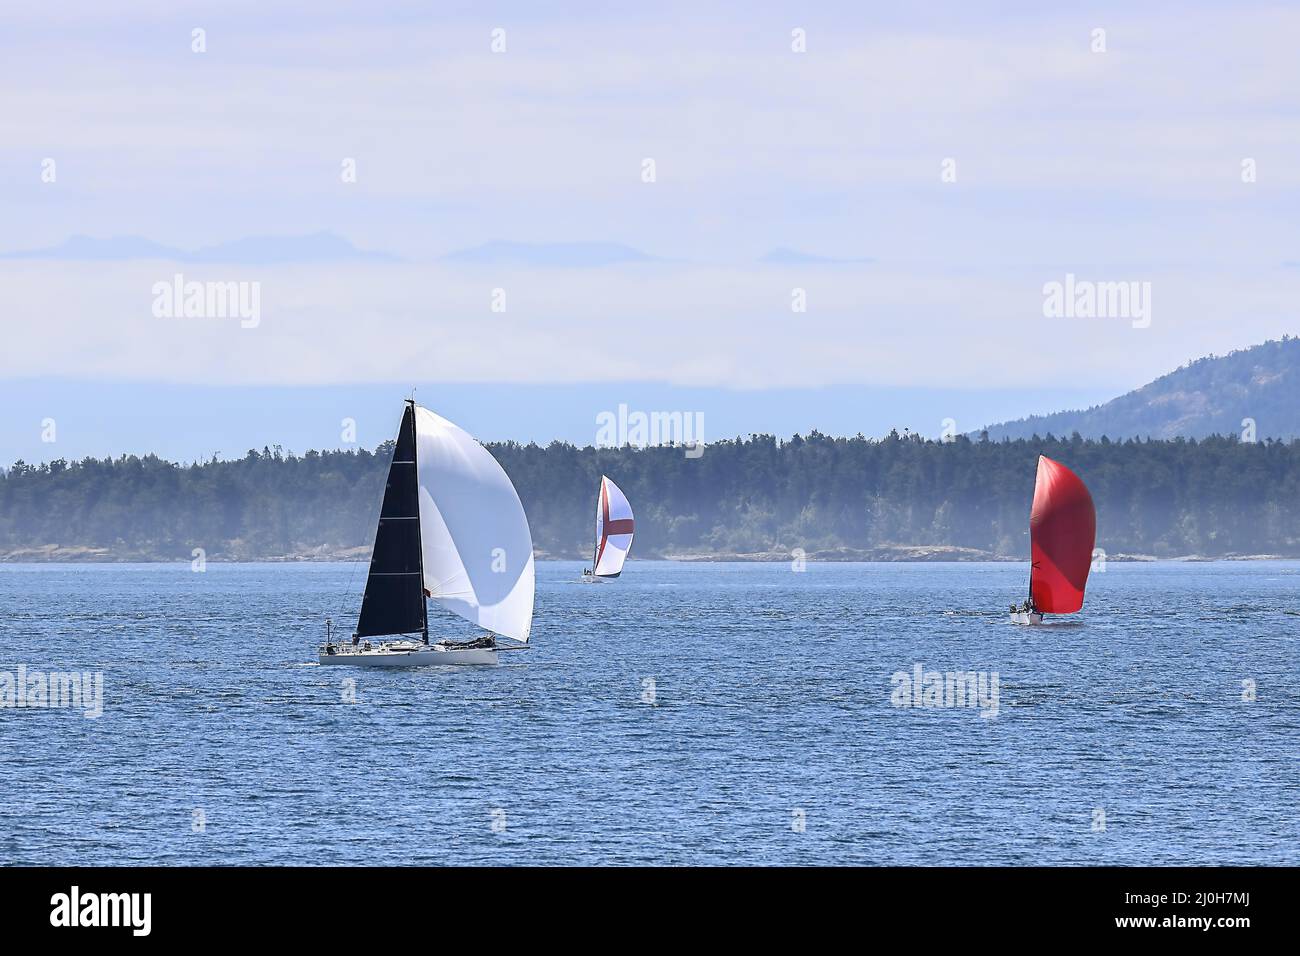 Recreation on the water. Stock Photo